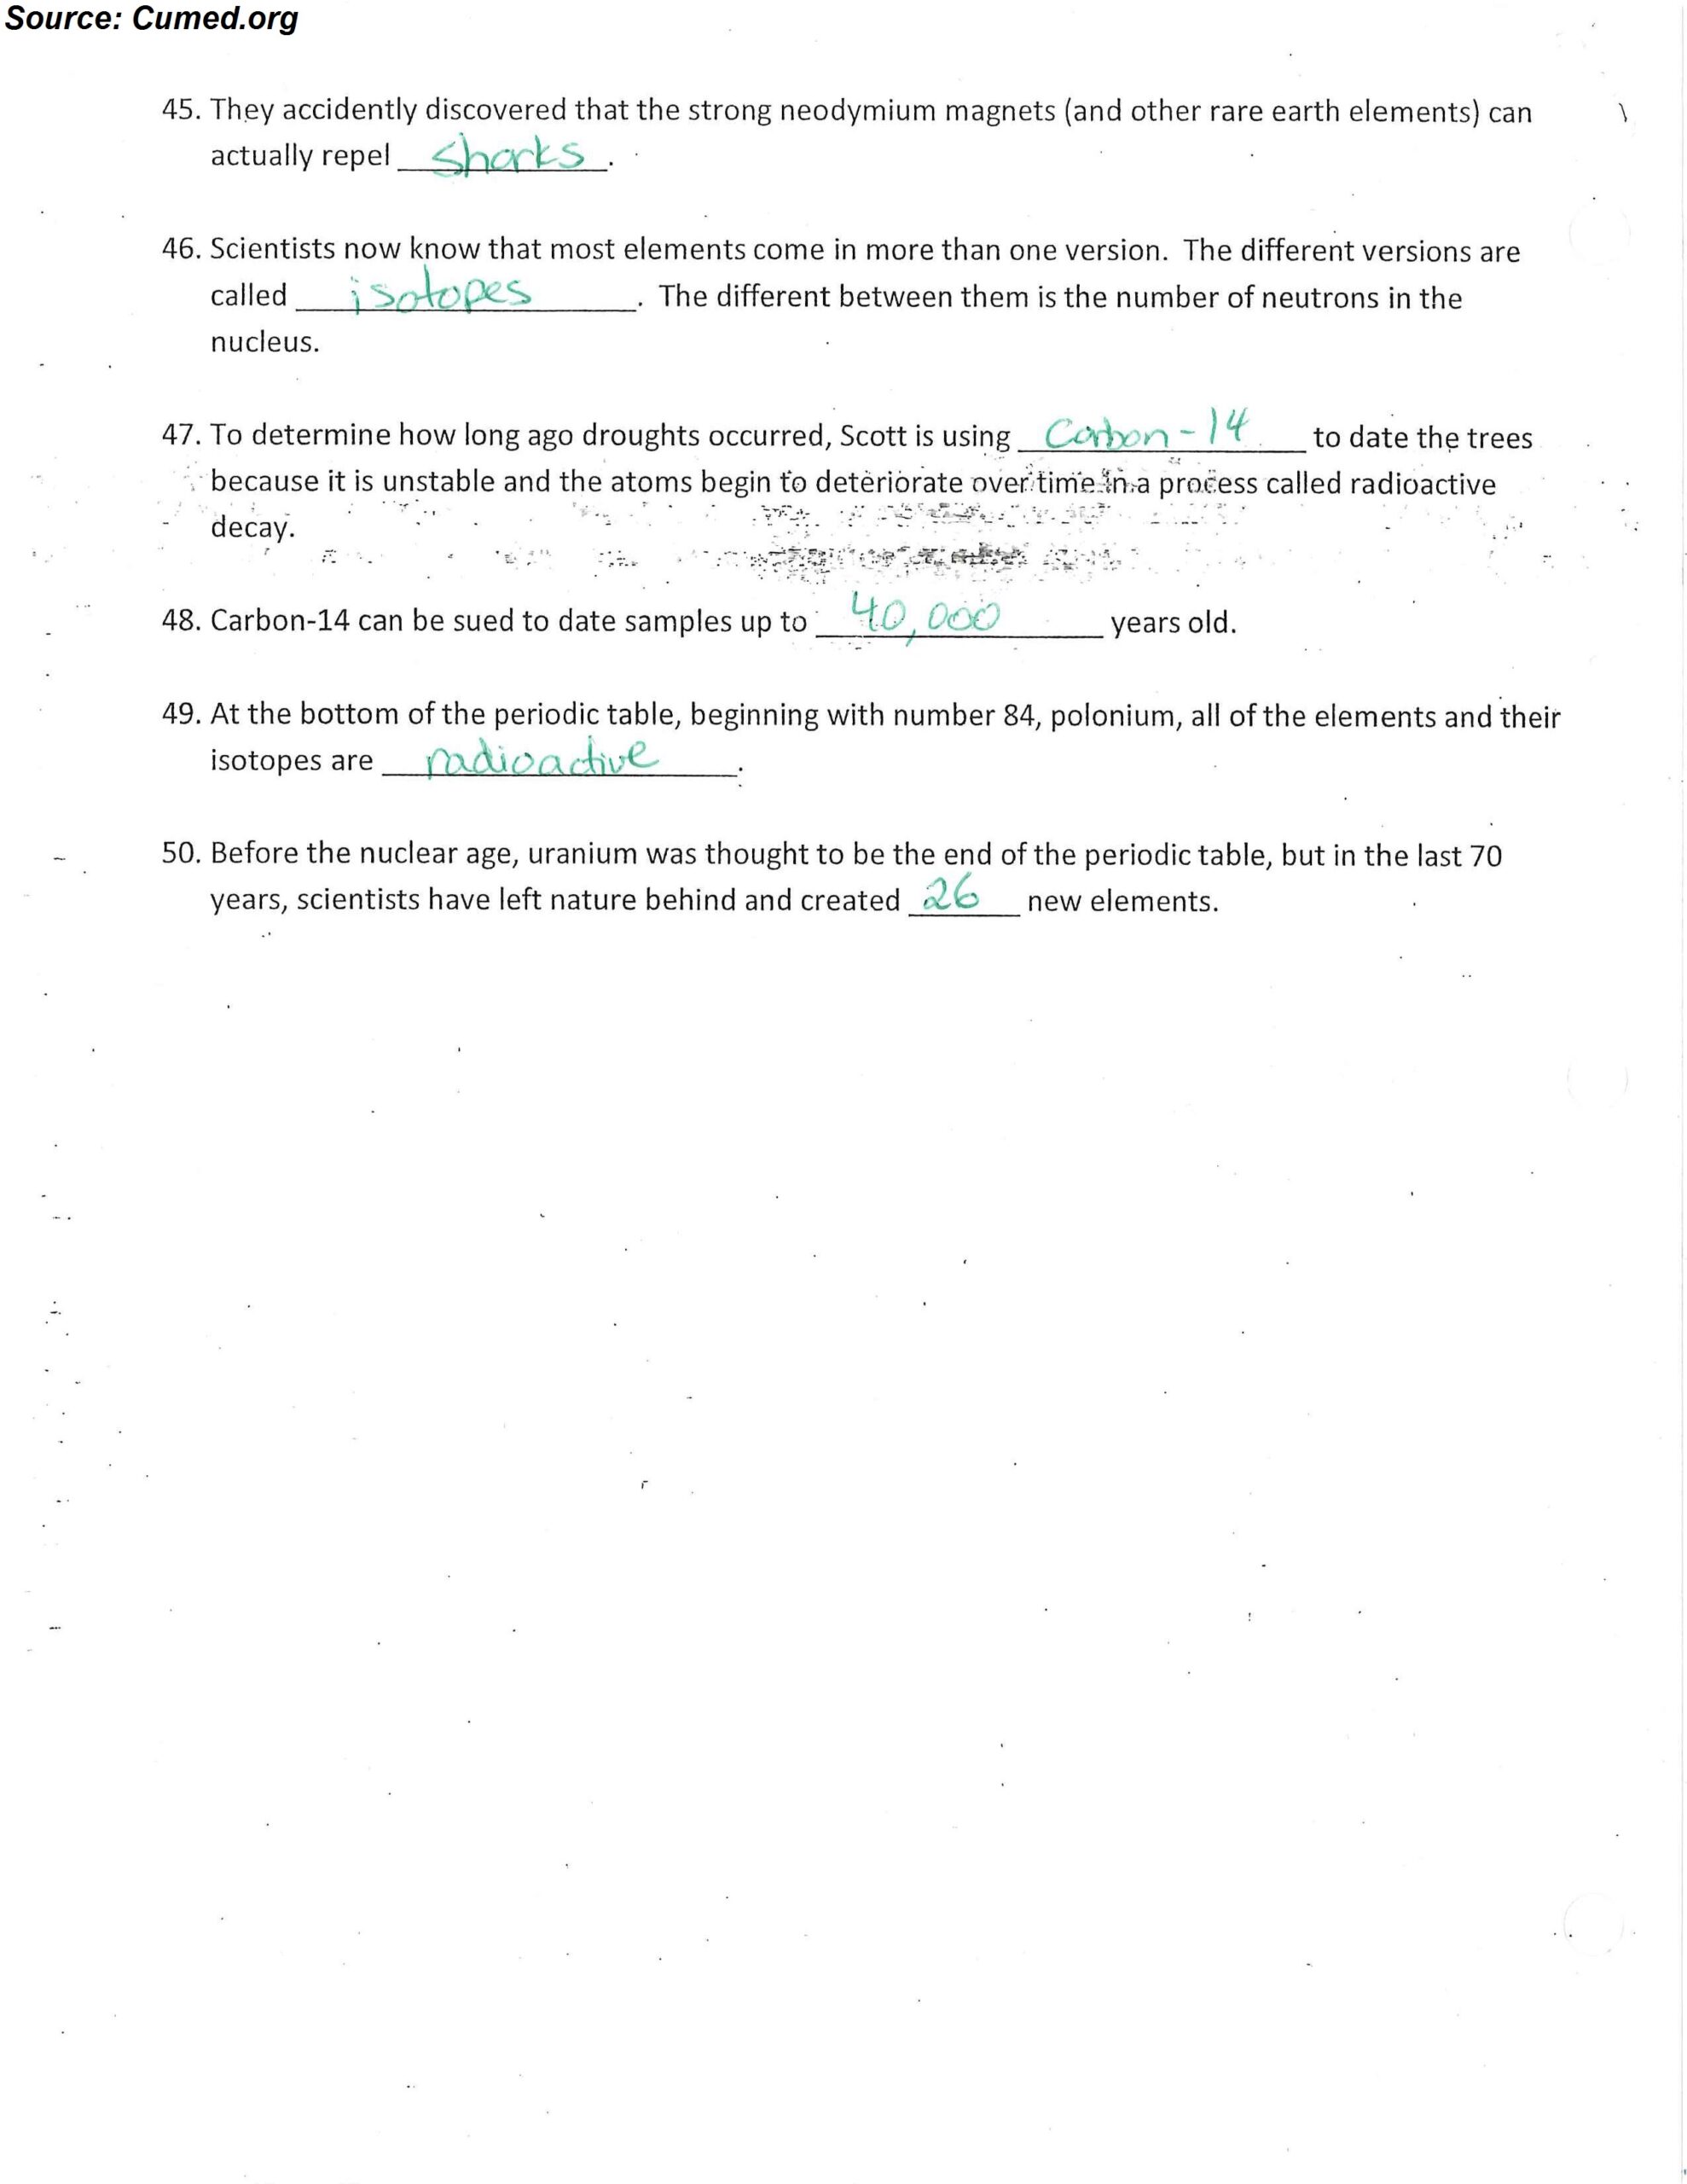 Hunting The Elements Worksheet Answers